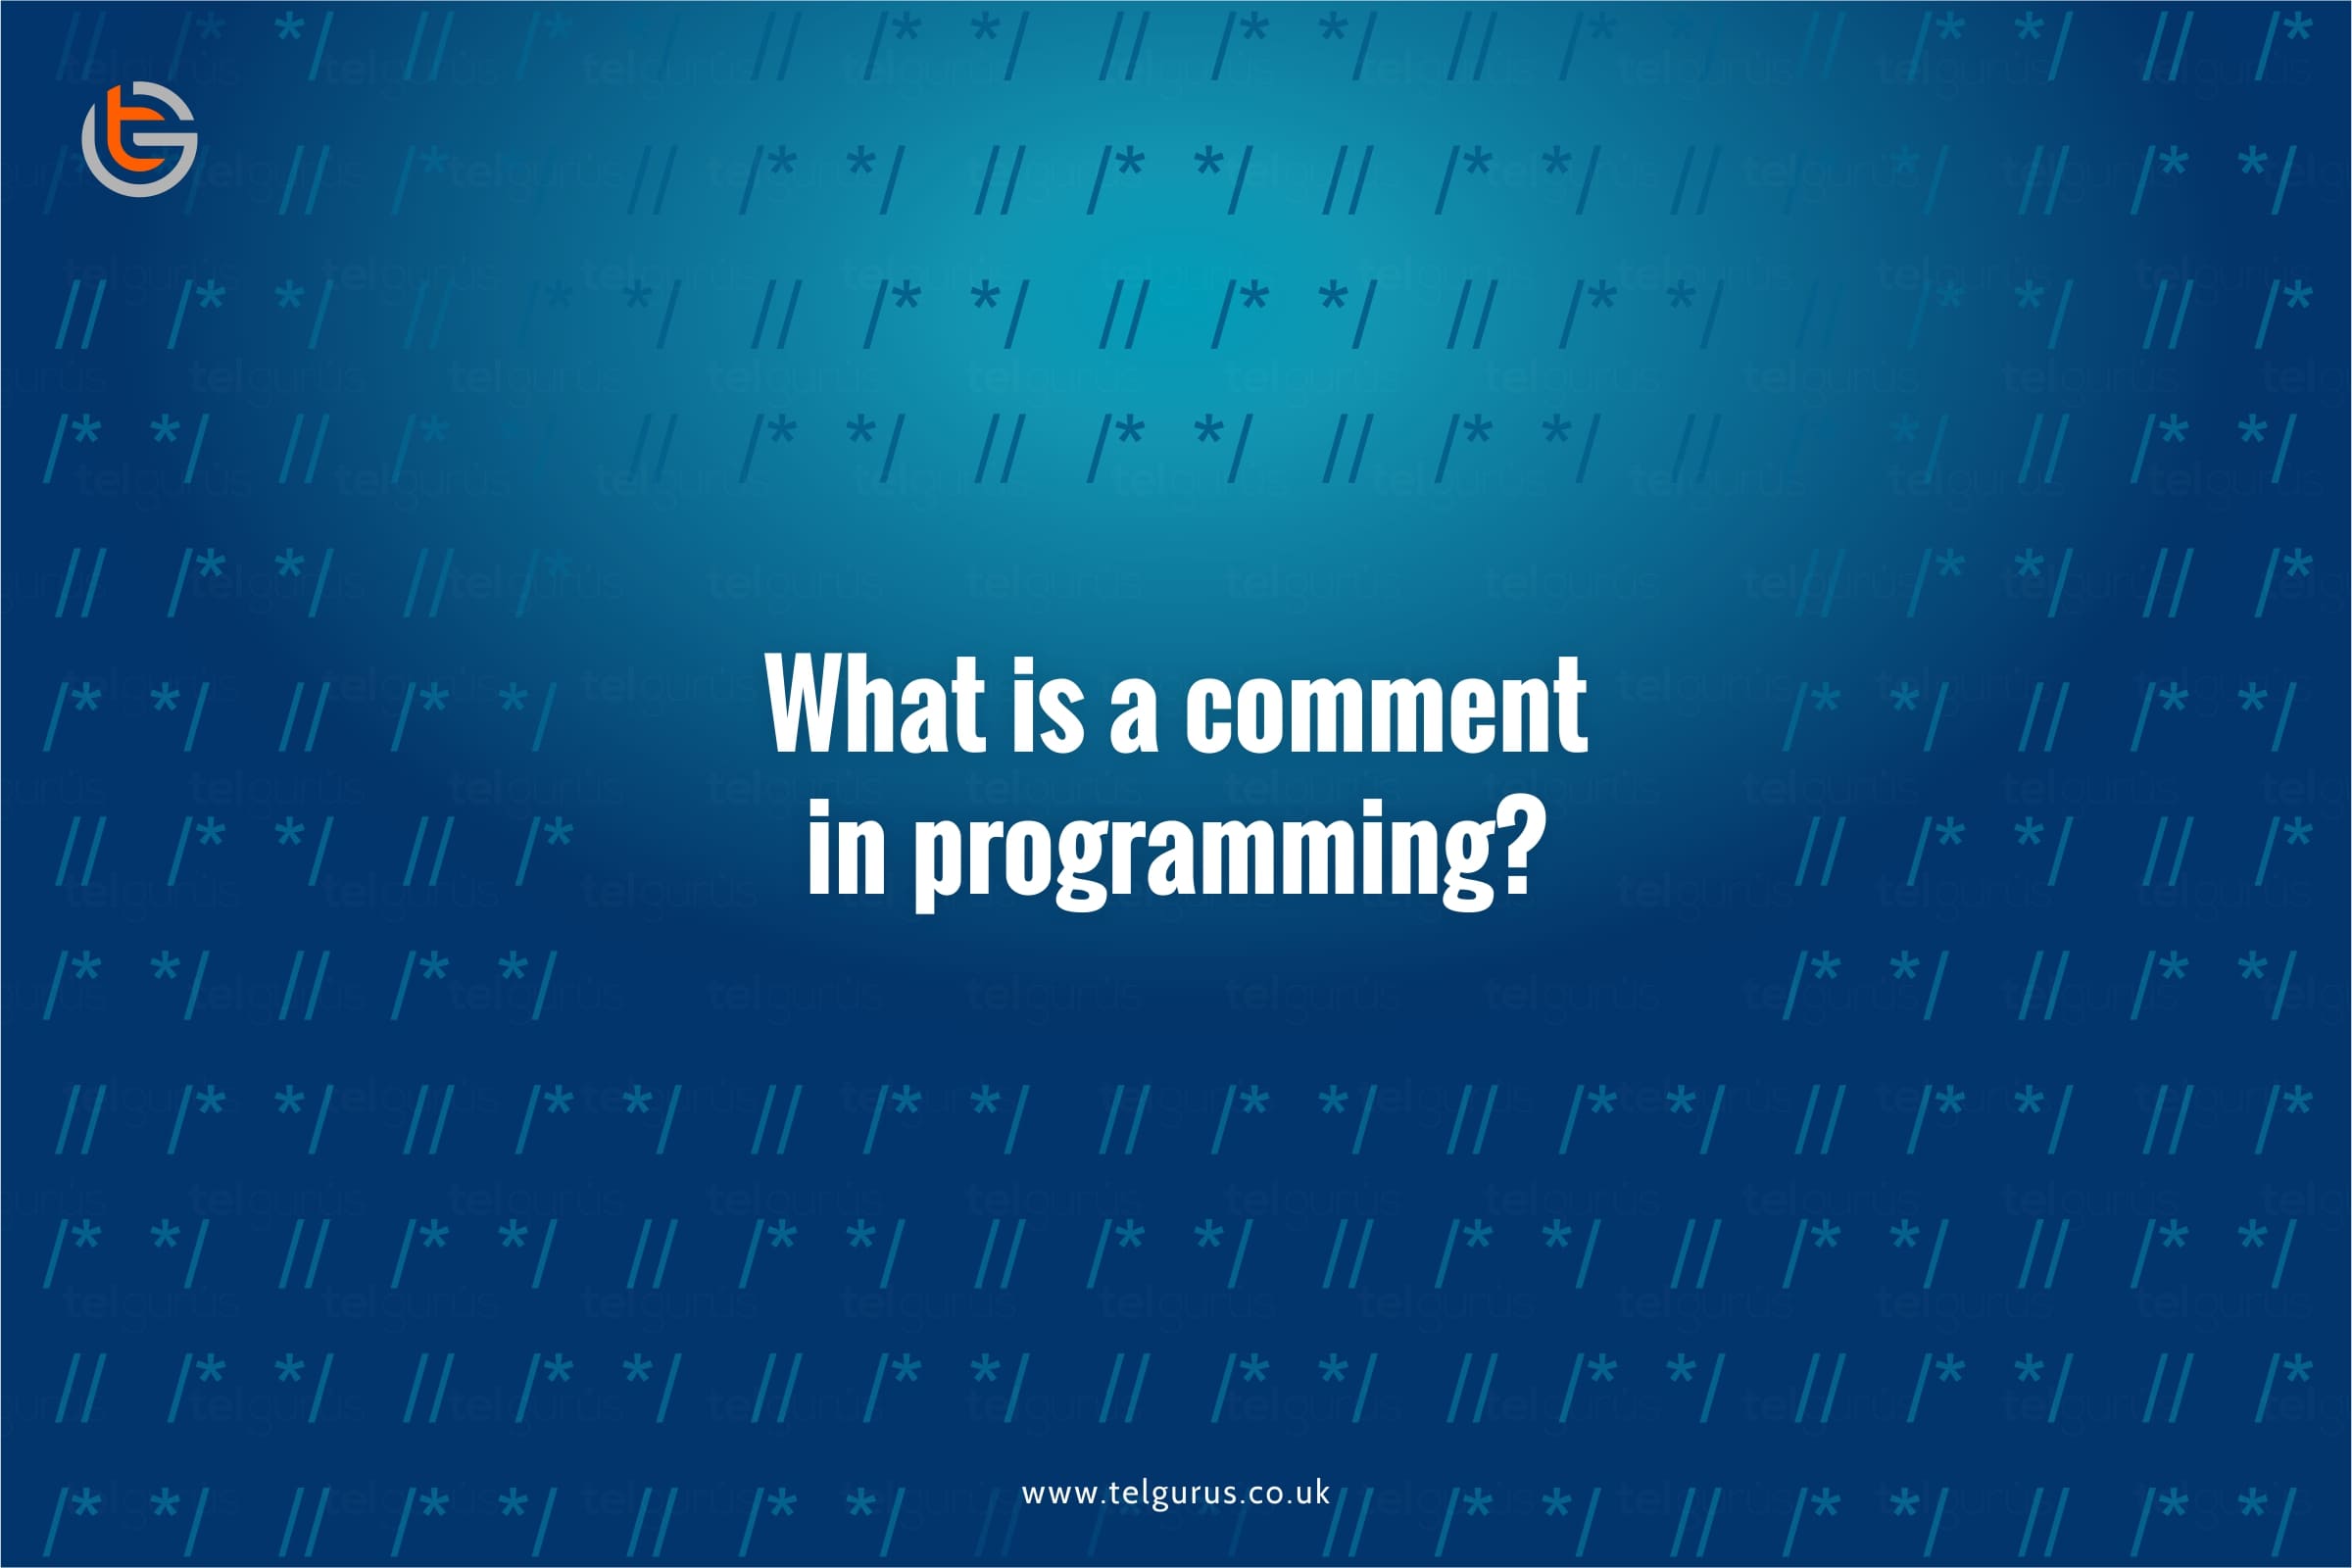 What is a comment in programming?